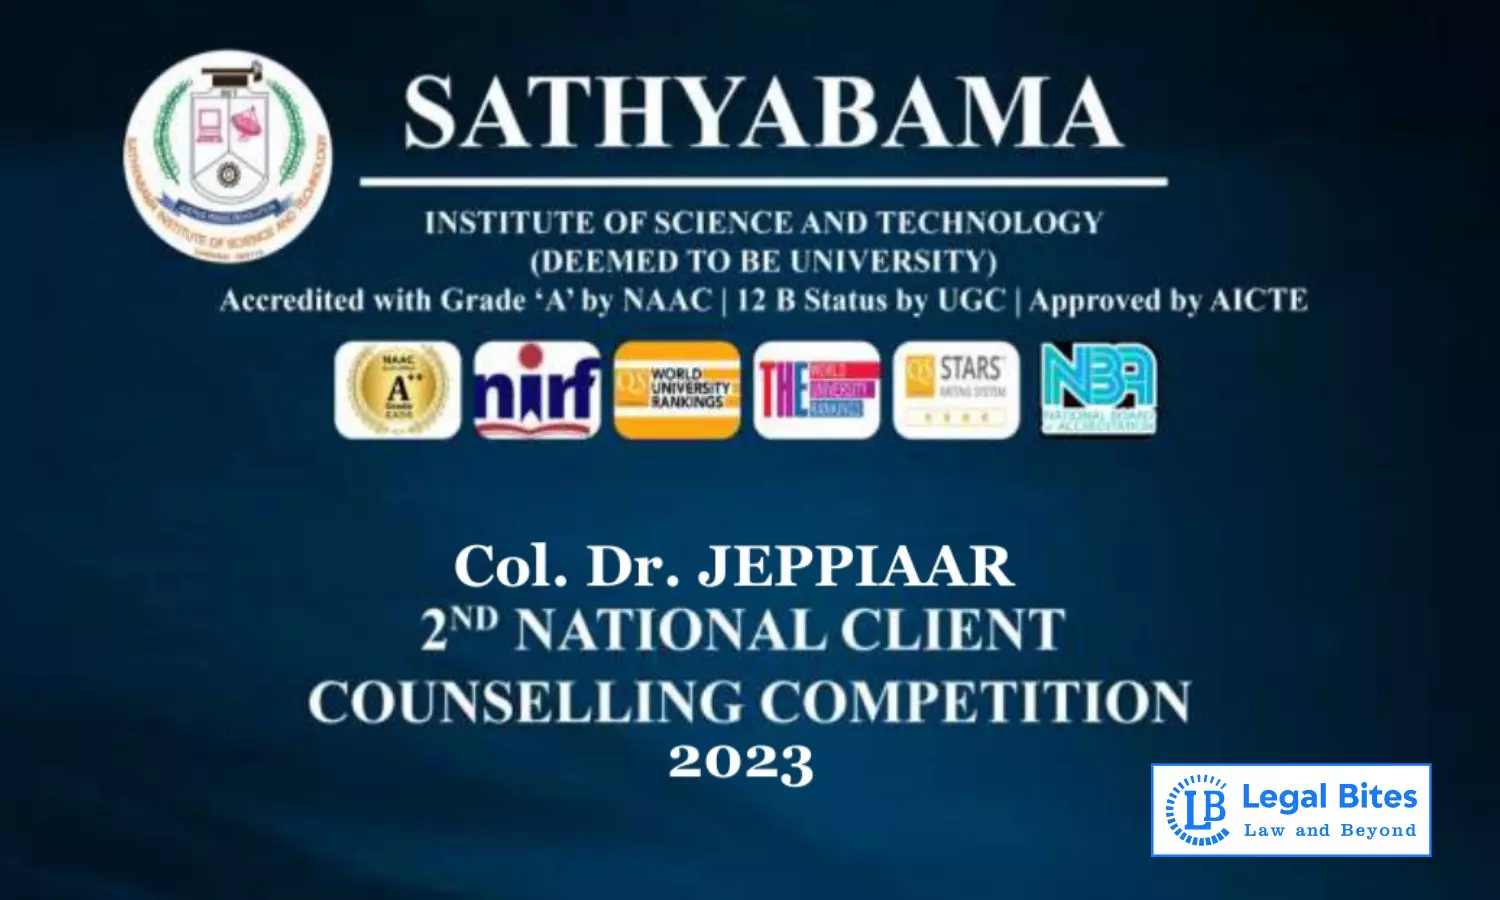 Col. Dr. JEPPIAAR 2nd National Client Counselling Competition, 2023 | Sathyabama School of Law